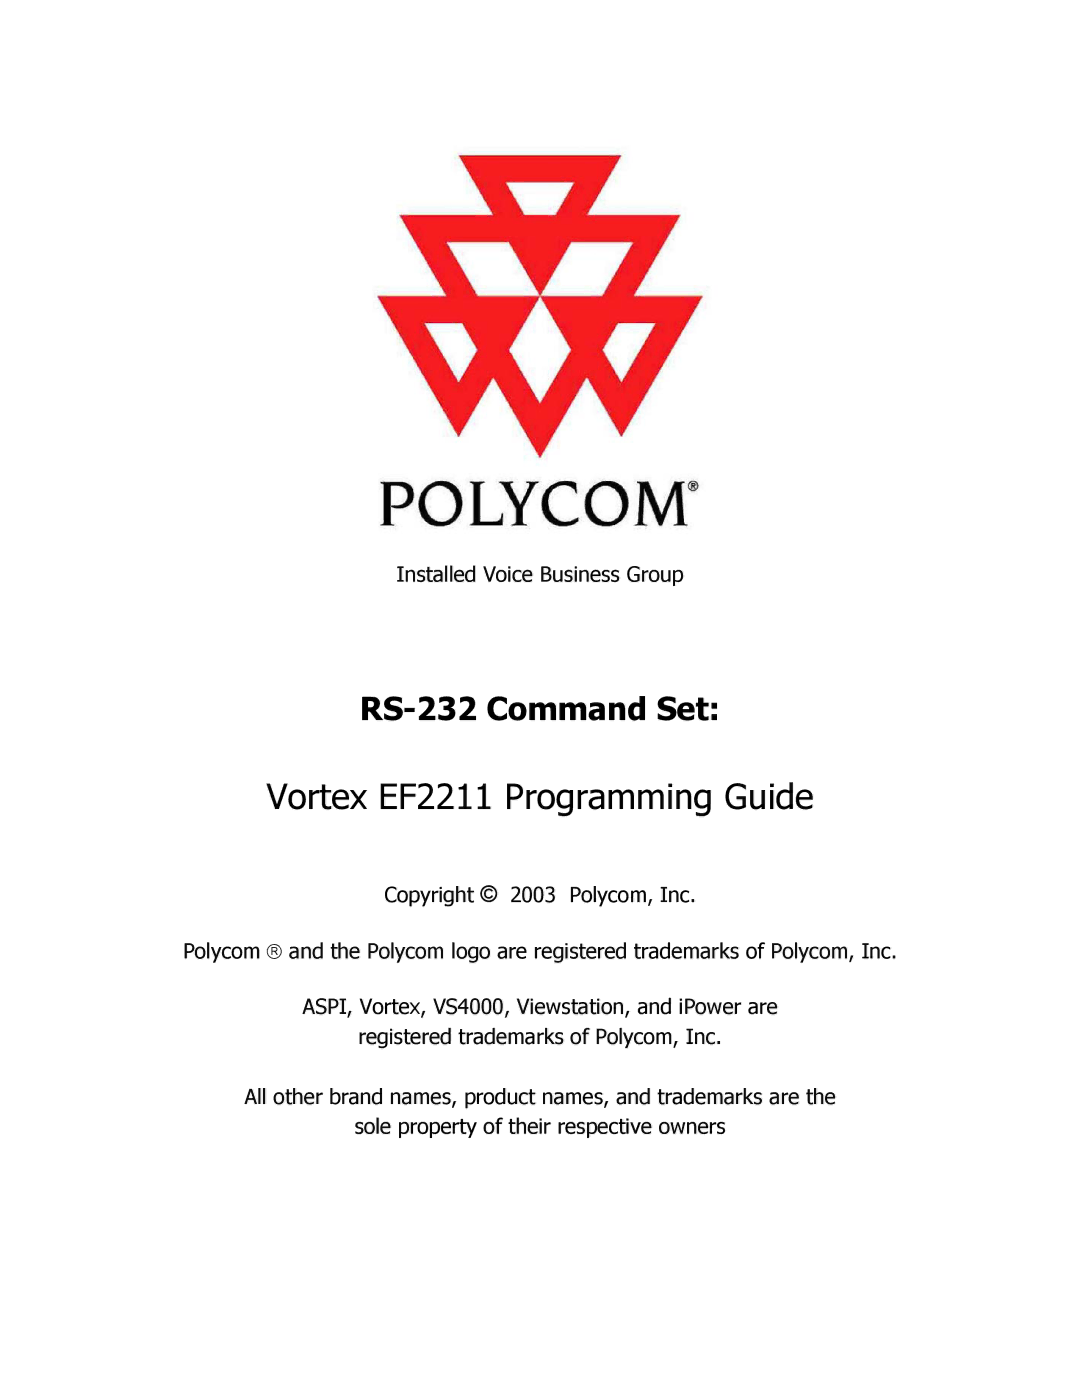 Polycom RS-232 manual Vortex EF2211 Programming Guide, Installed Voice Business Group 